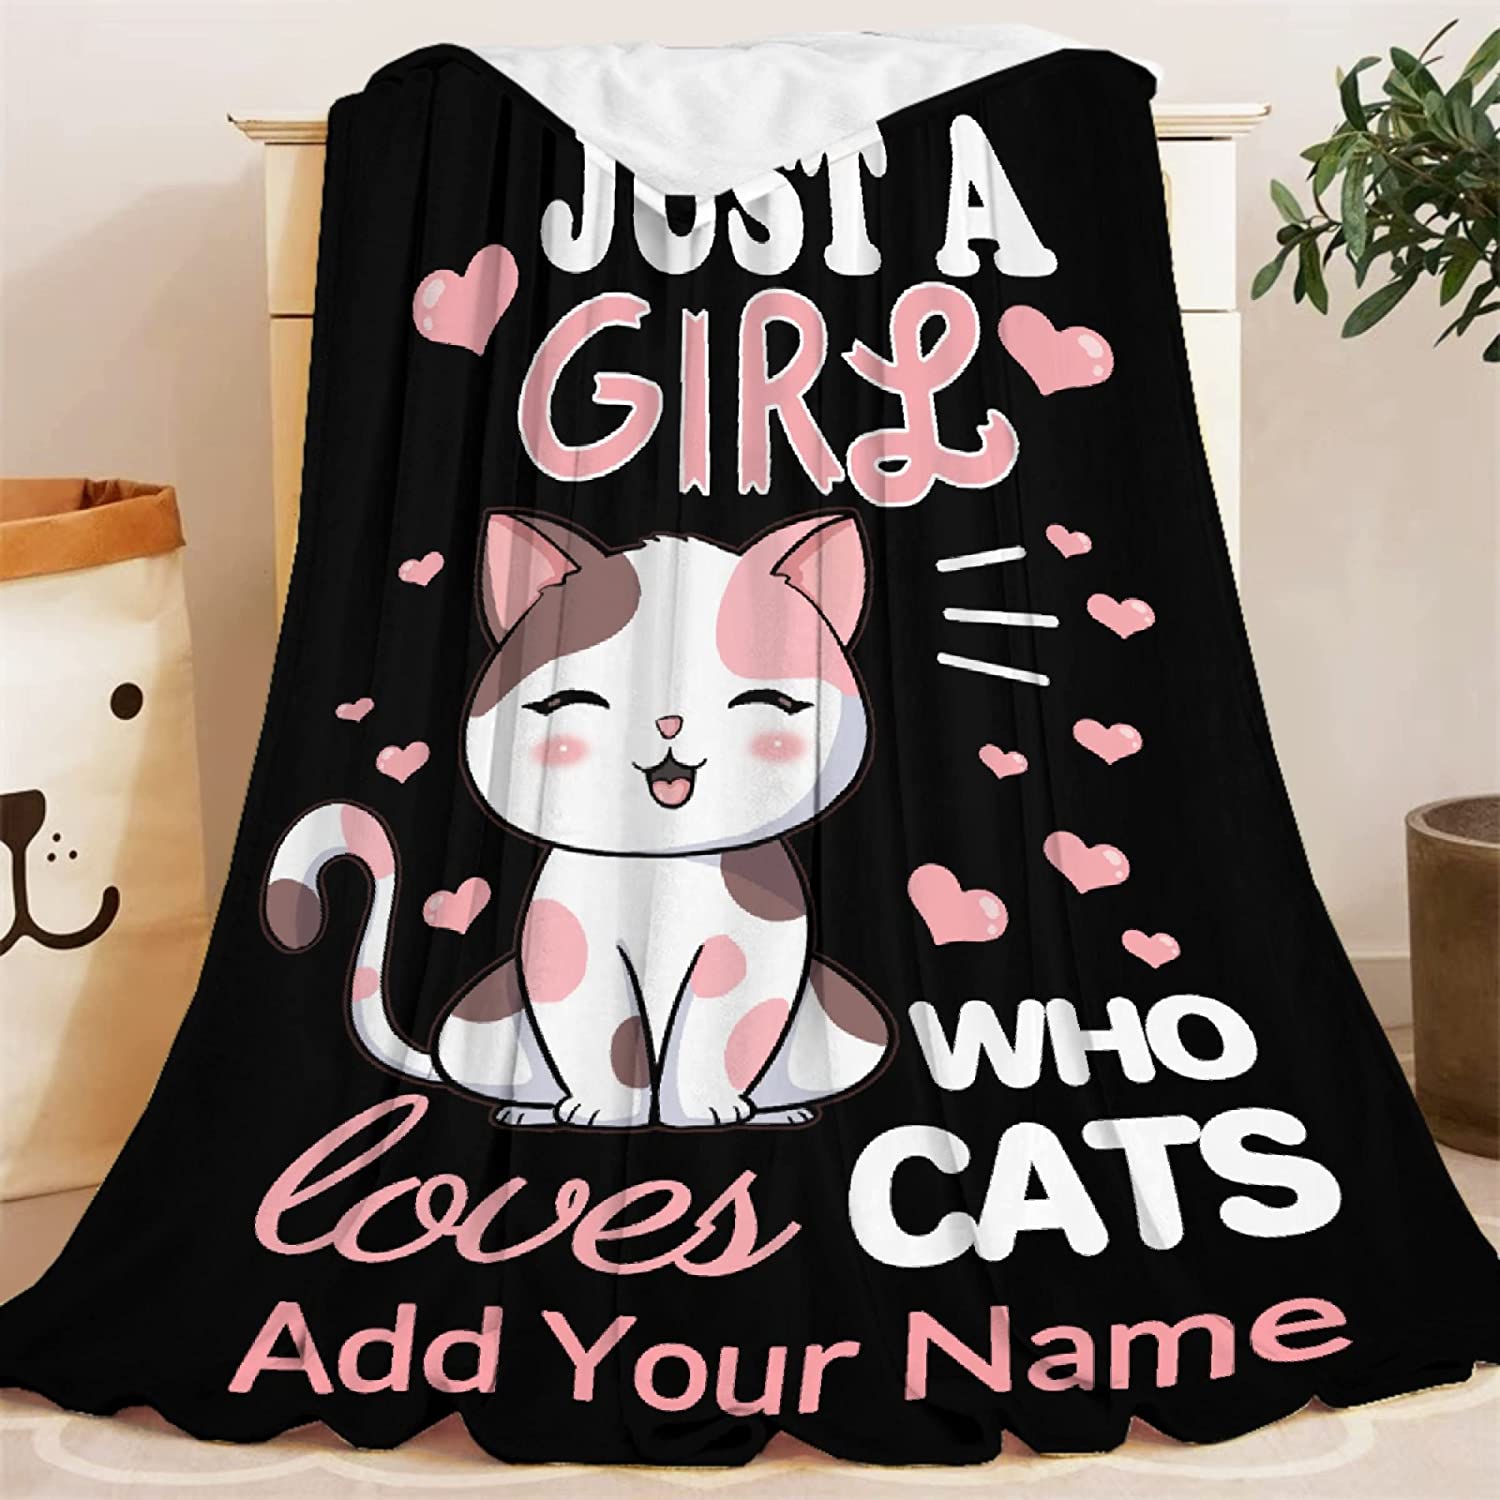 Personalized Cat Blanket - Cute Animals Blankets - Custom Gift For Cat Lovers, Kittens, Daughters, Women, Kids - Just A Girl Who Loves Cats Blankets